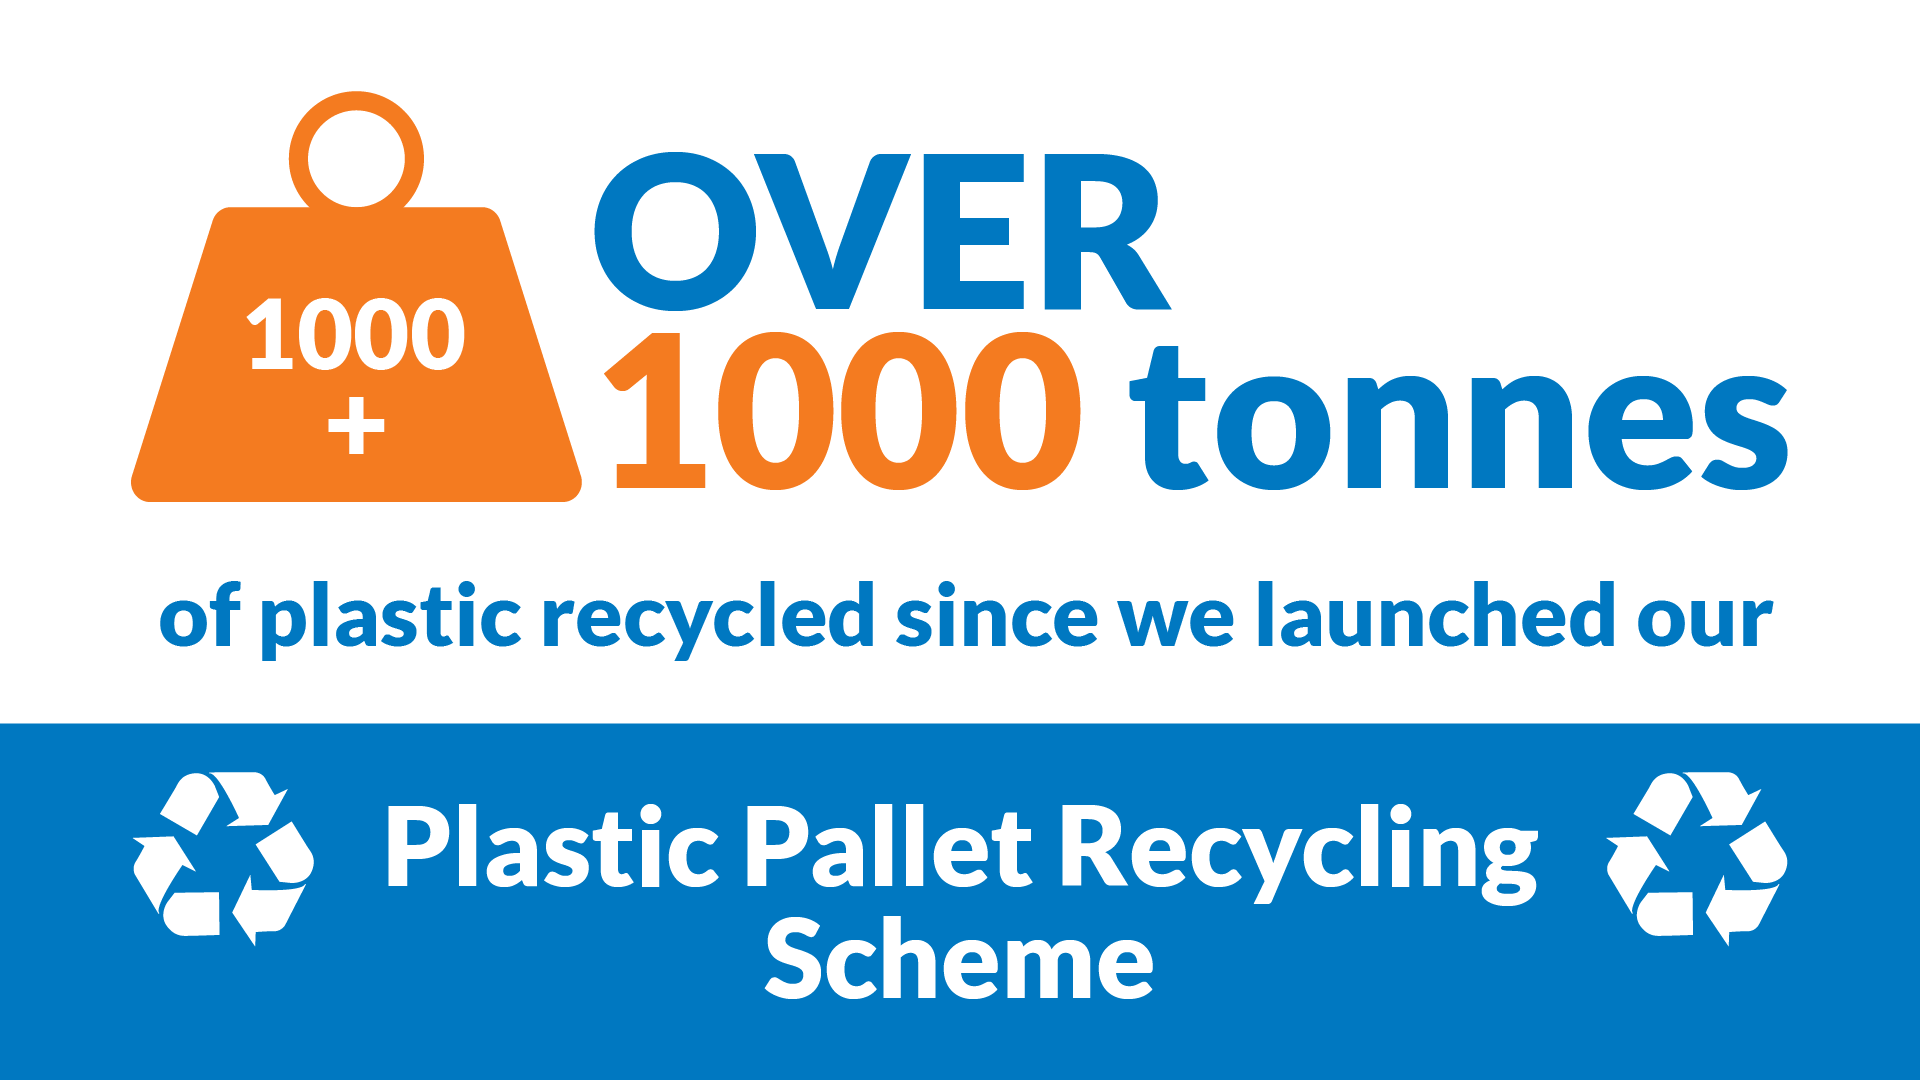 Over 1000 tonnes of plastic recycled since we launched our plastic pallet recycling scheme